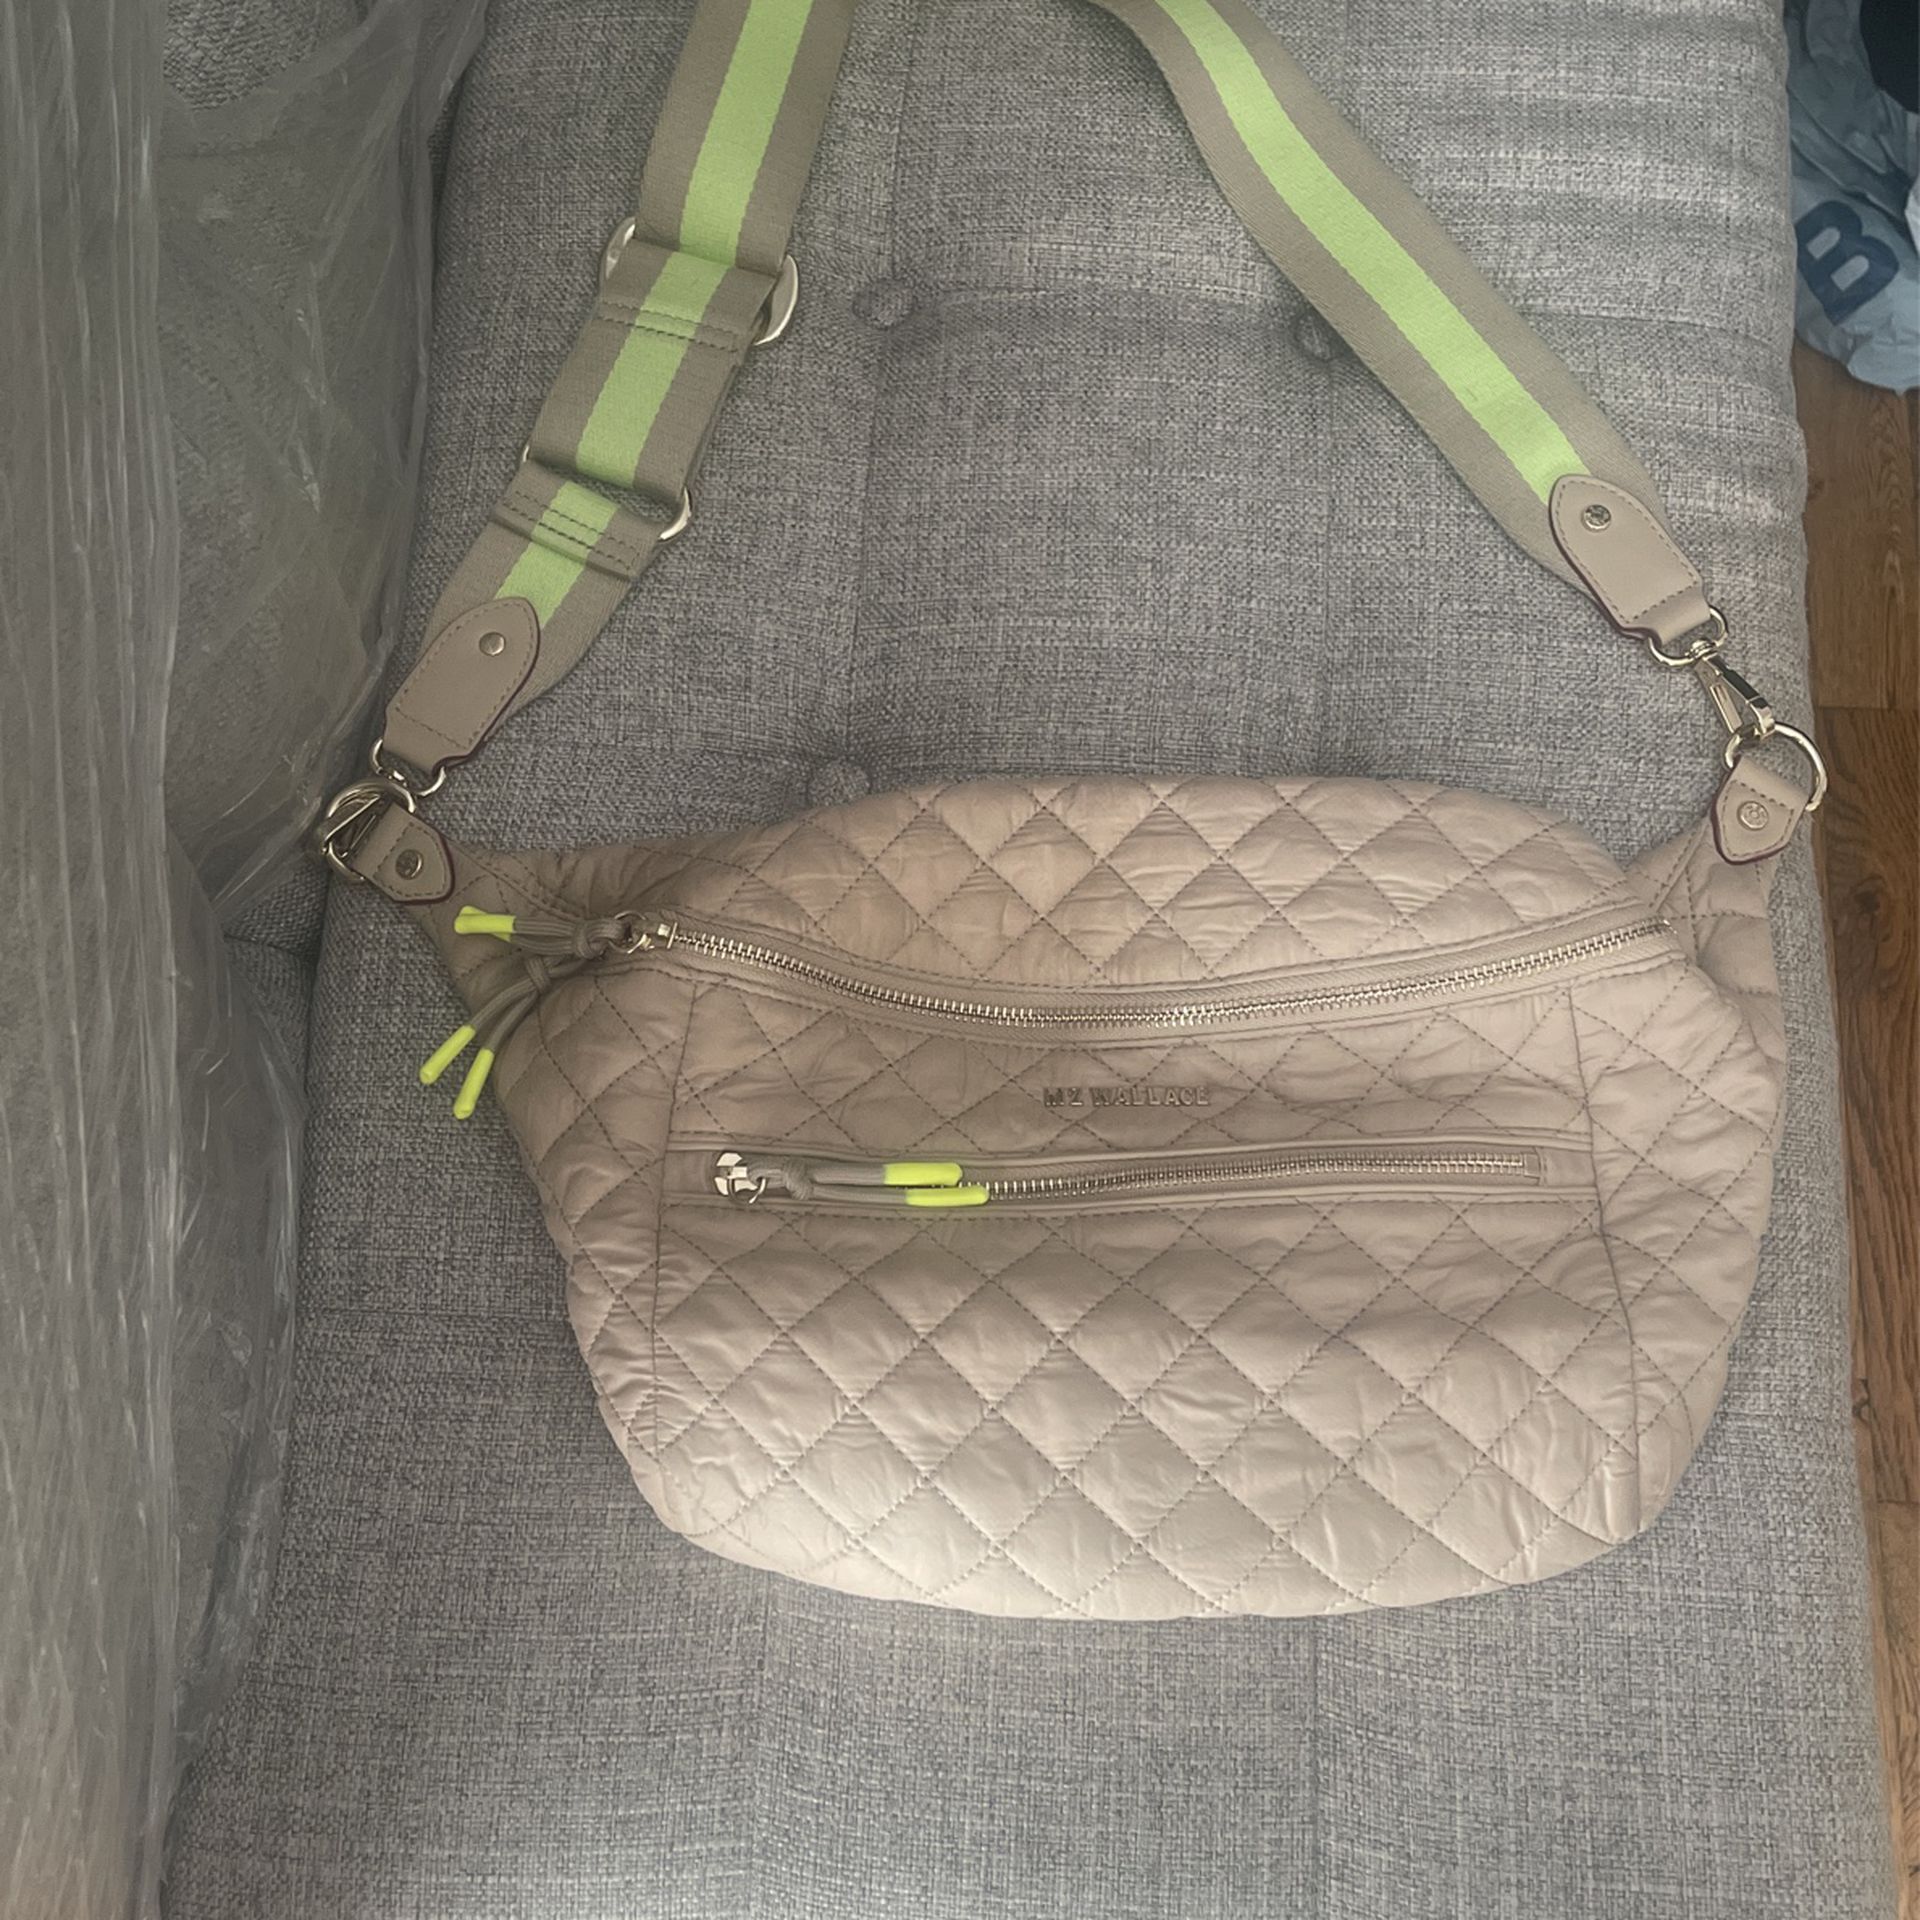 MZ WALLACE Large Crossbody Sling Bag for Sale in Merrick, NY